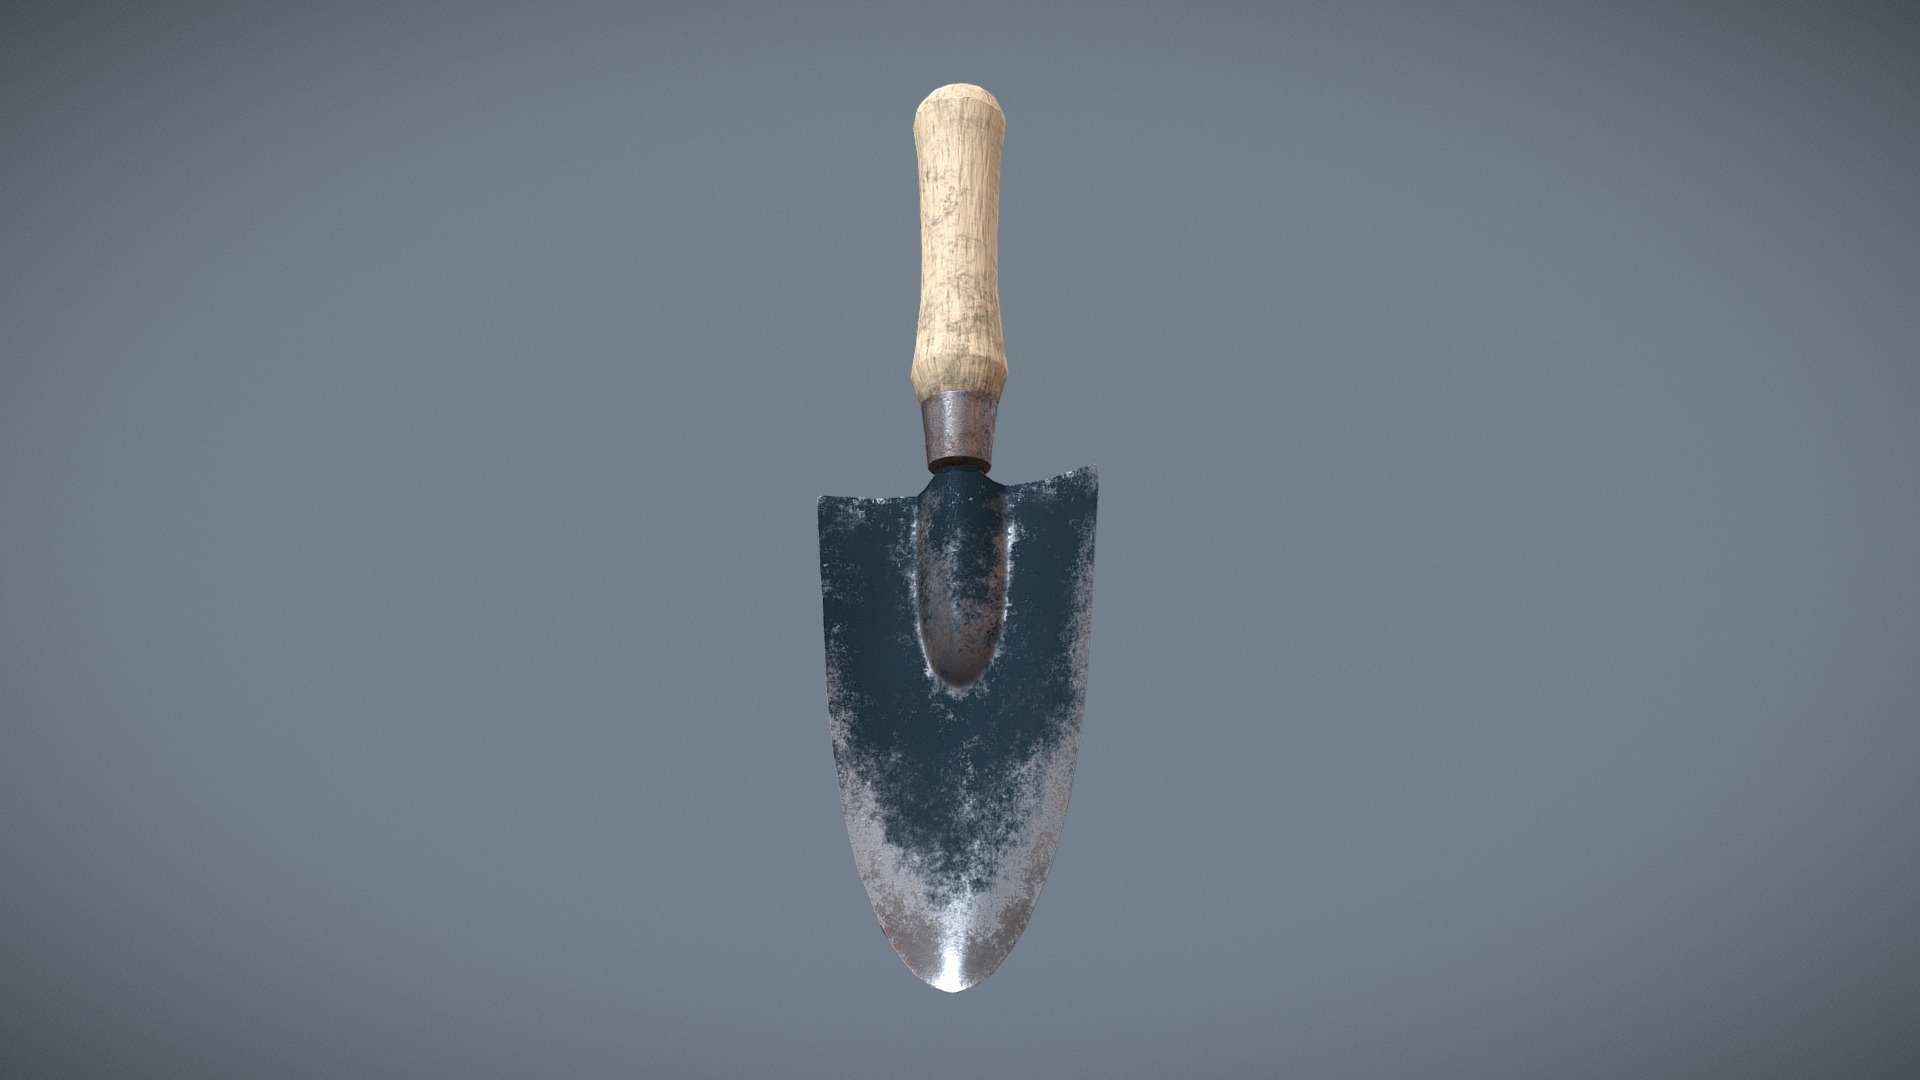 3D model Low poly garden trowel - This is a 3D model of the Low poly garden trowel. The 3D model is about a spoon on a grey background.